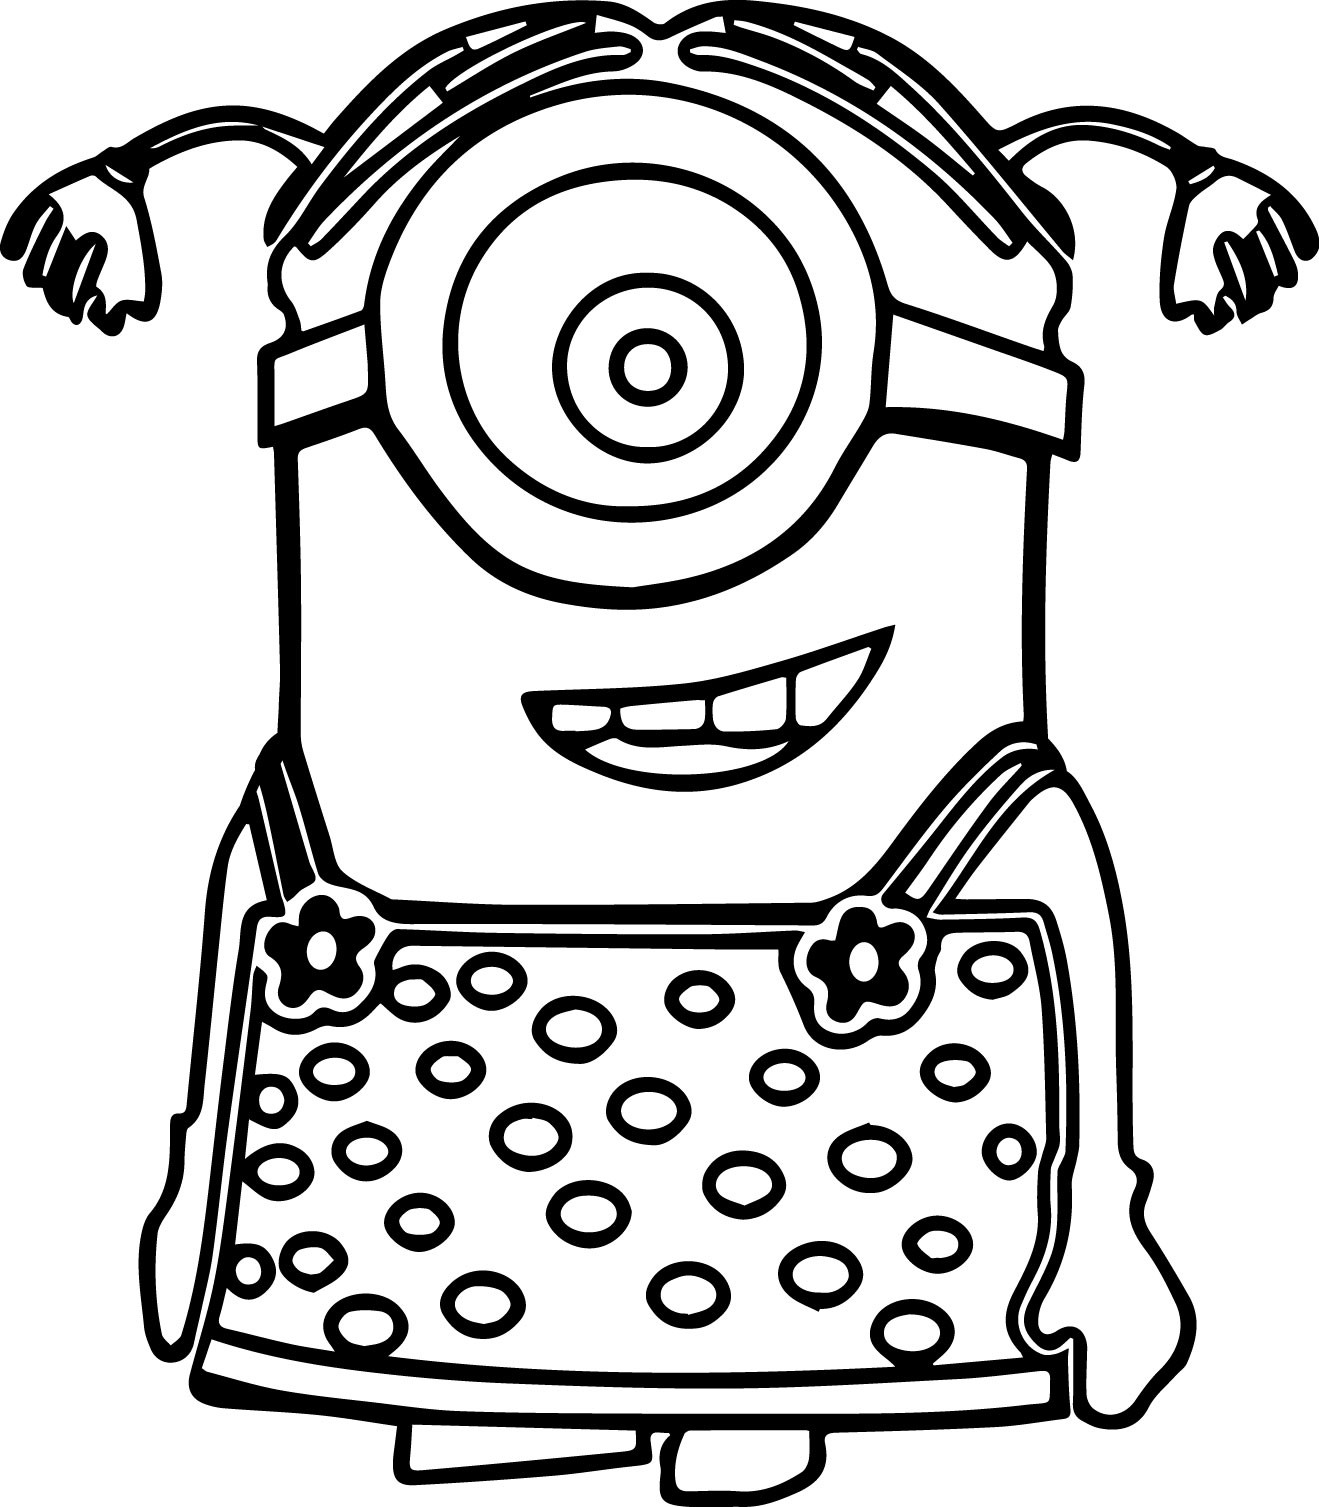 Free Printable Minion Coloring Pages
 Minion Coloring Pages